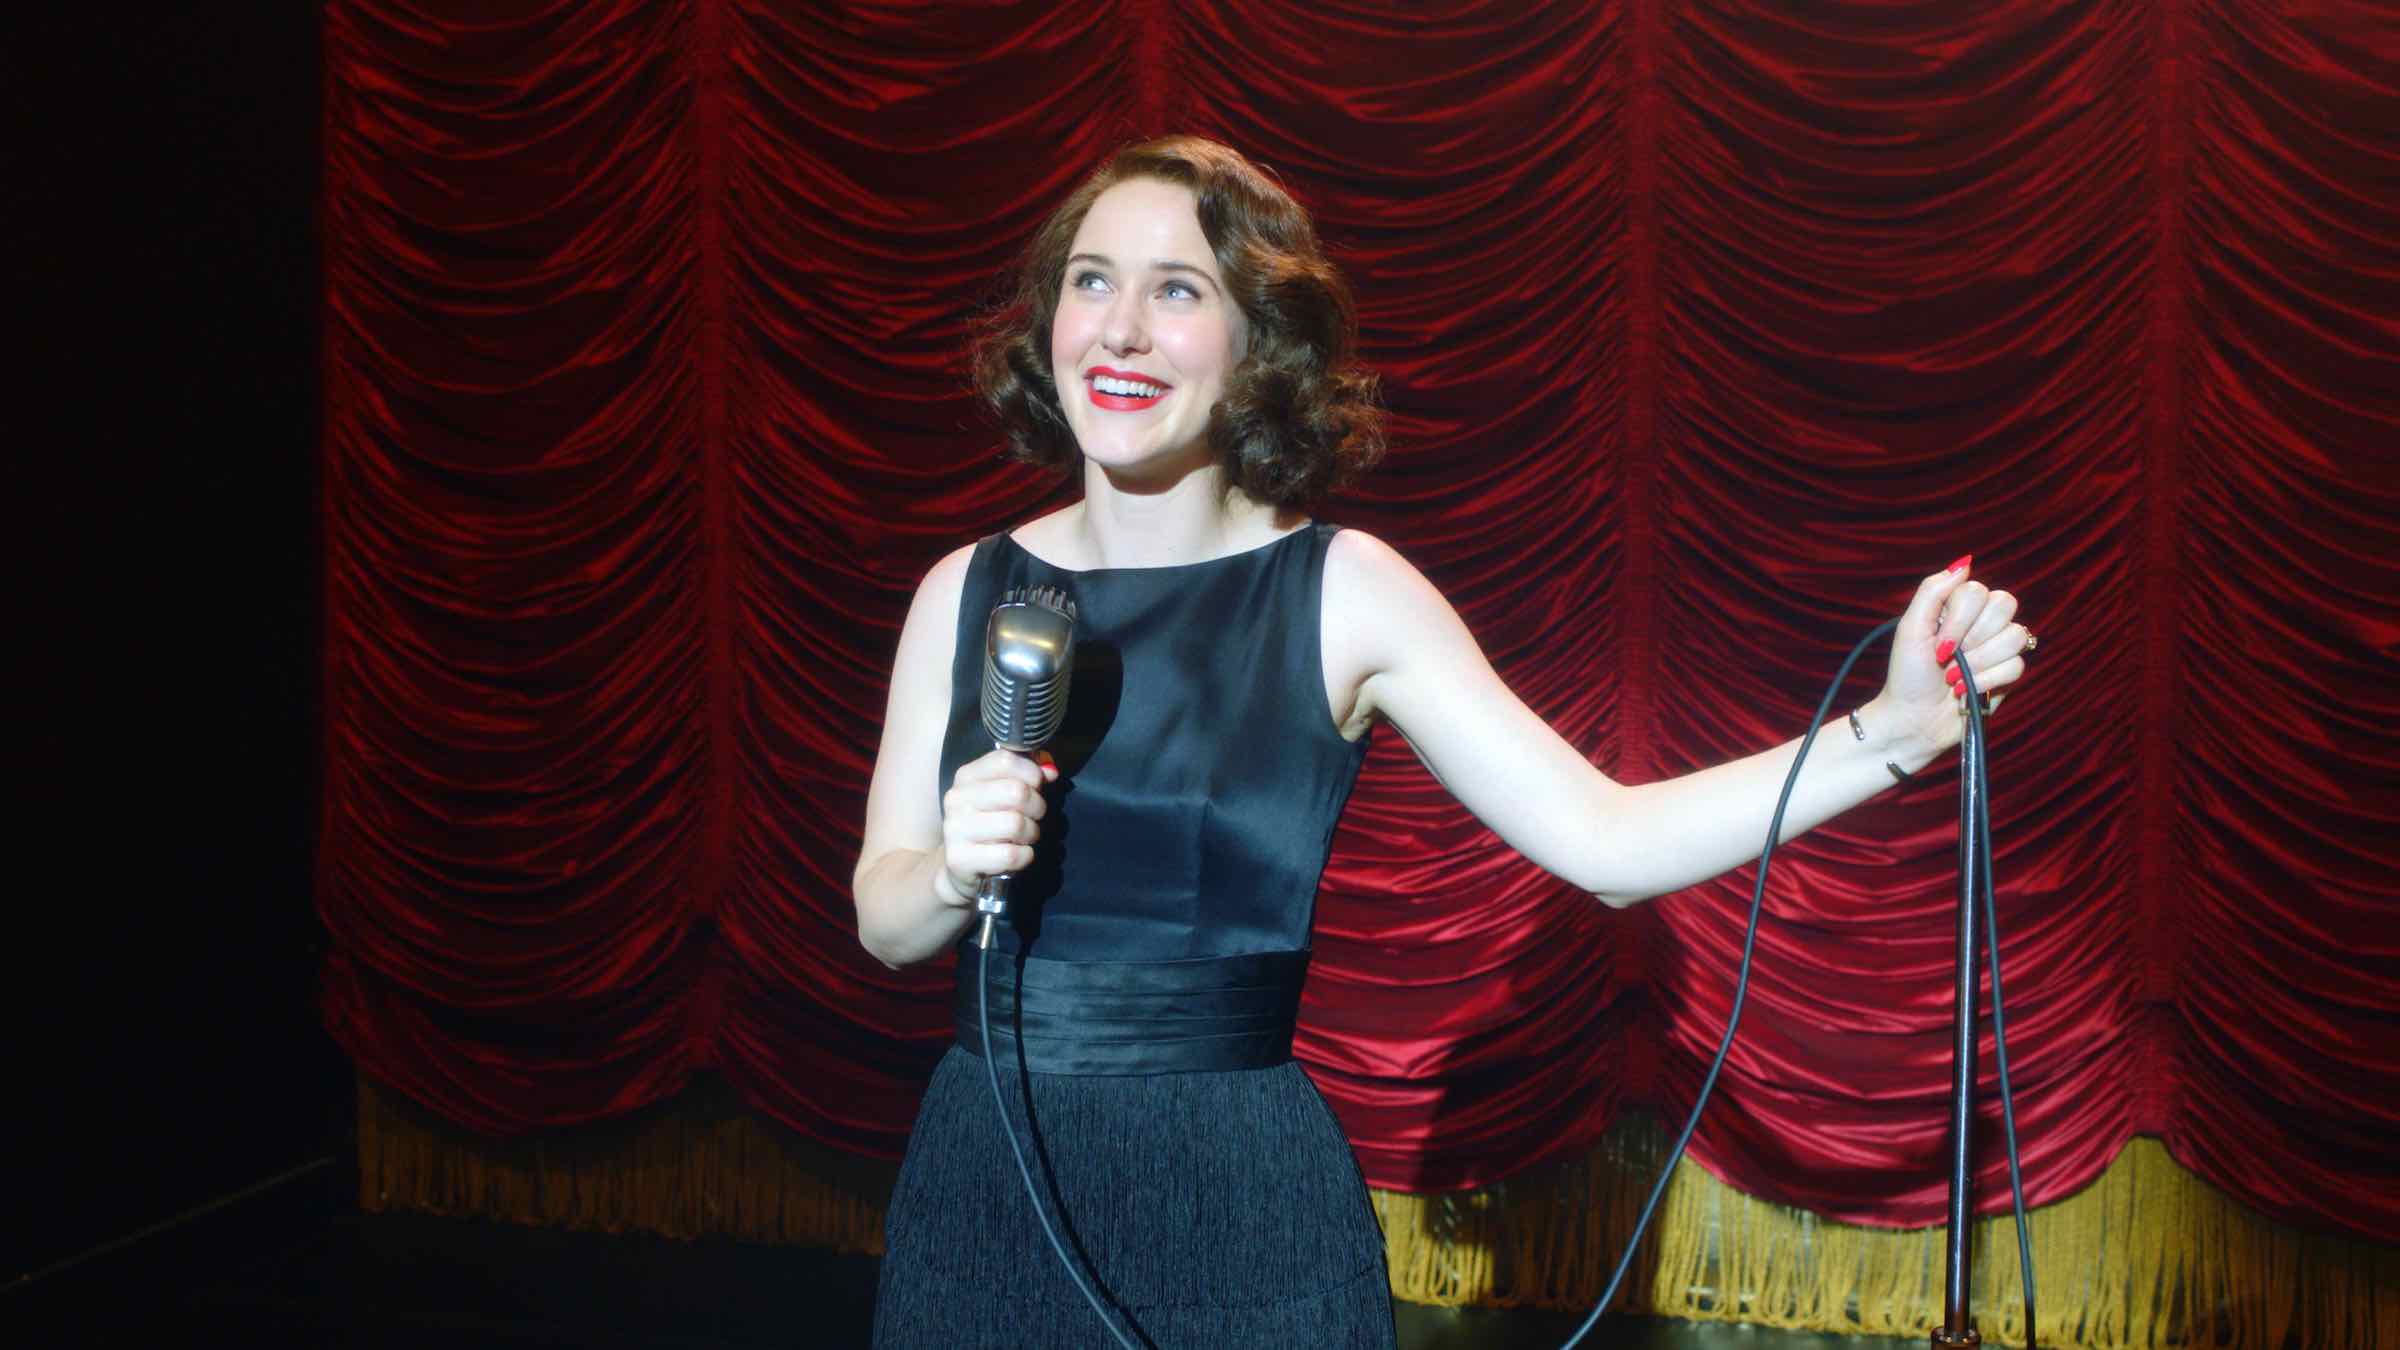 In 'The Marvelous Mrs. Maisel' S3, Midge embarks on a career-defining tour throughout the United States and Europe. Here's what's in store.